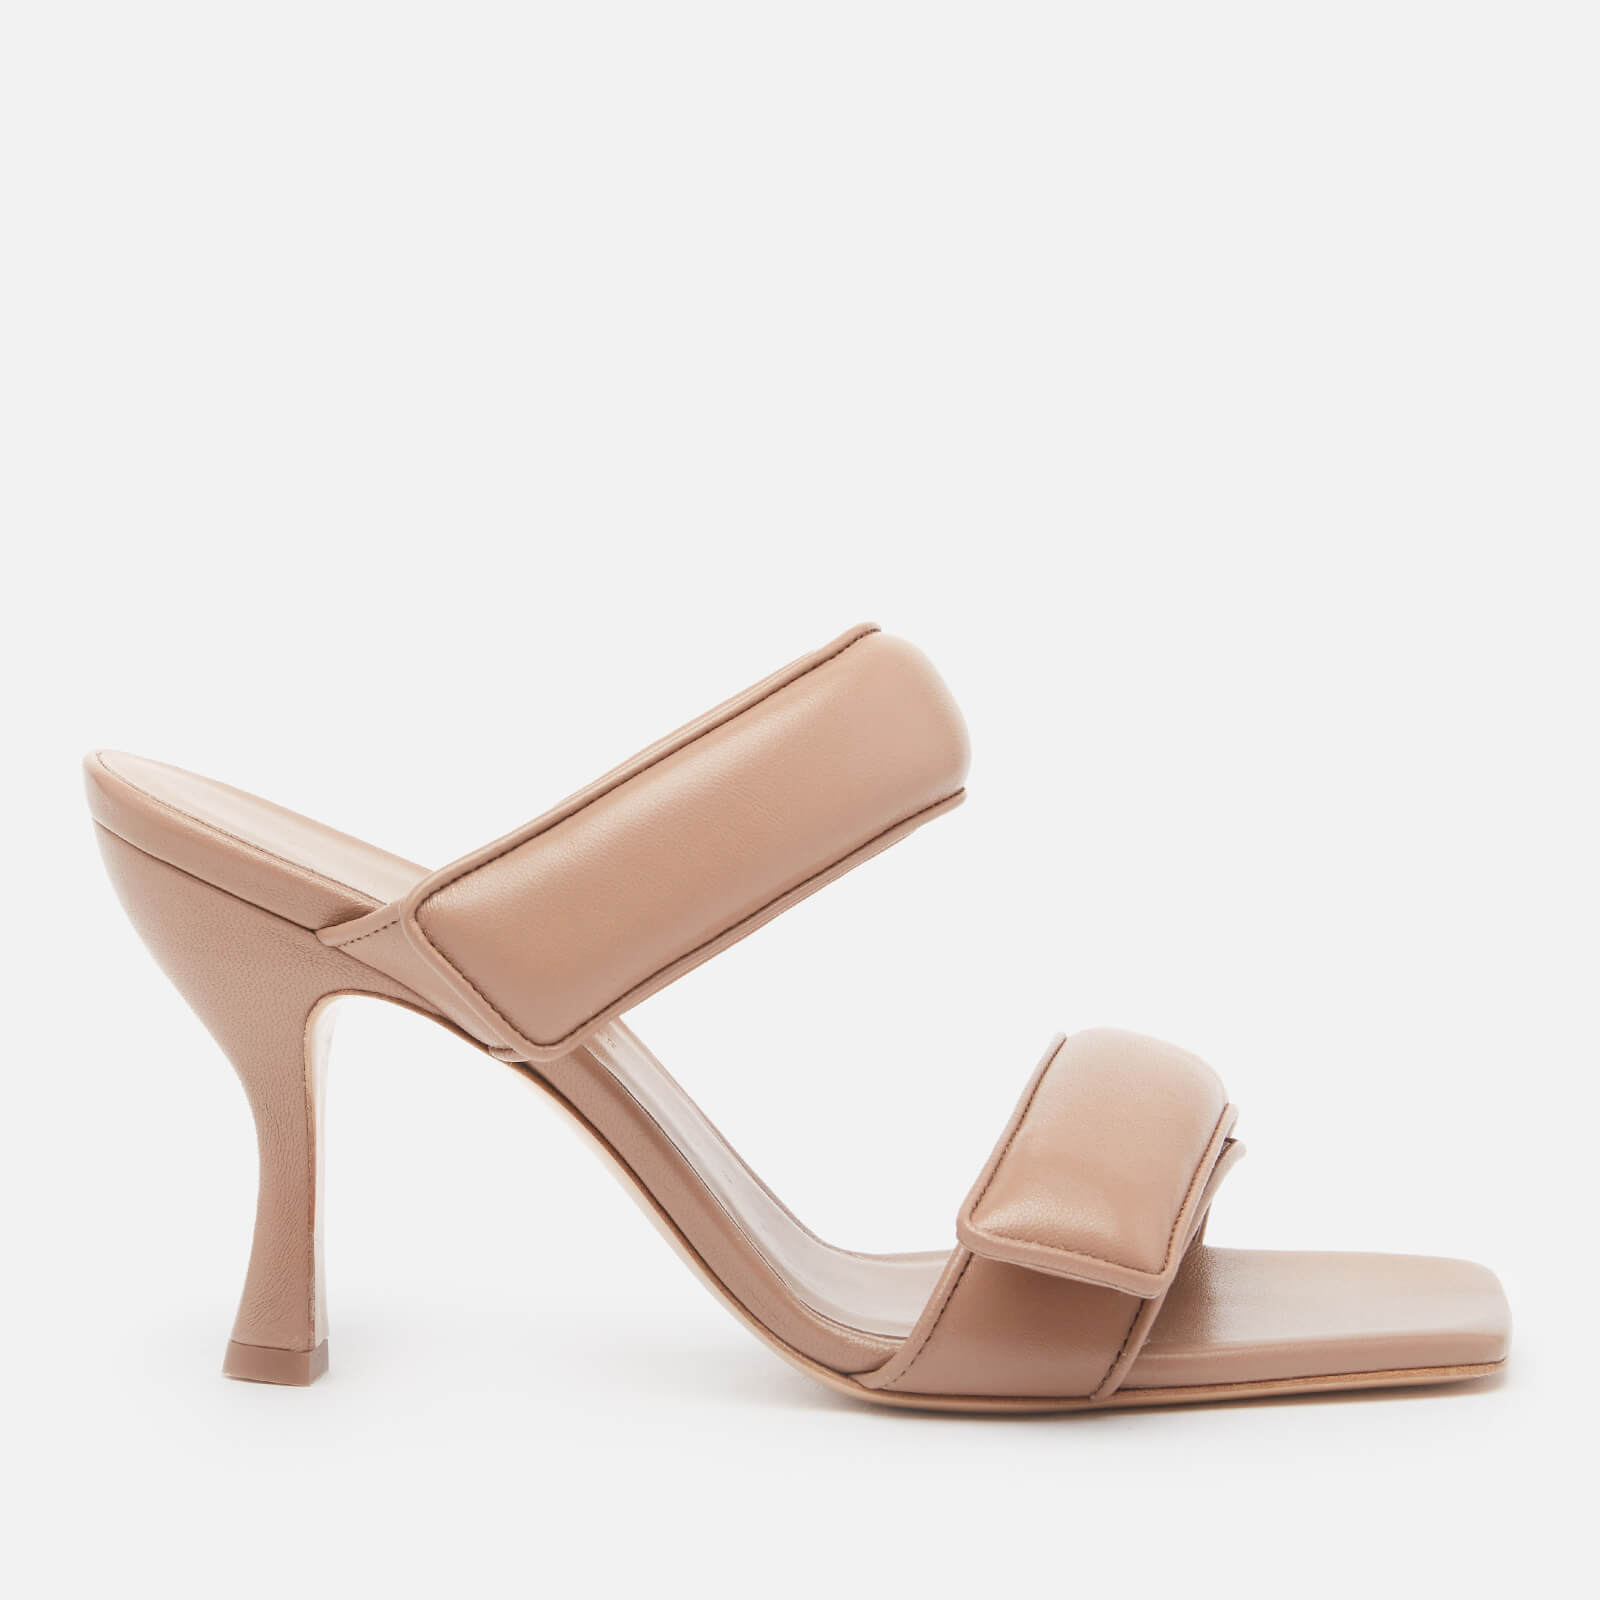 Gia Couture X Pernille Women's Perni 80mm Leather Two Strap Heeled Sandals - Nude Brown - UK 4